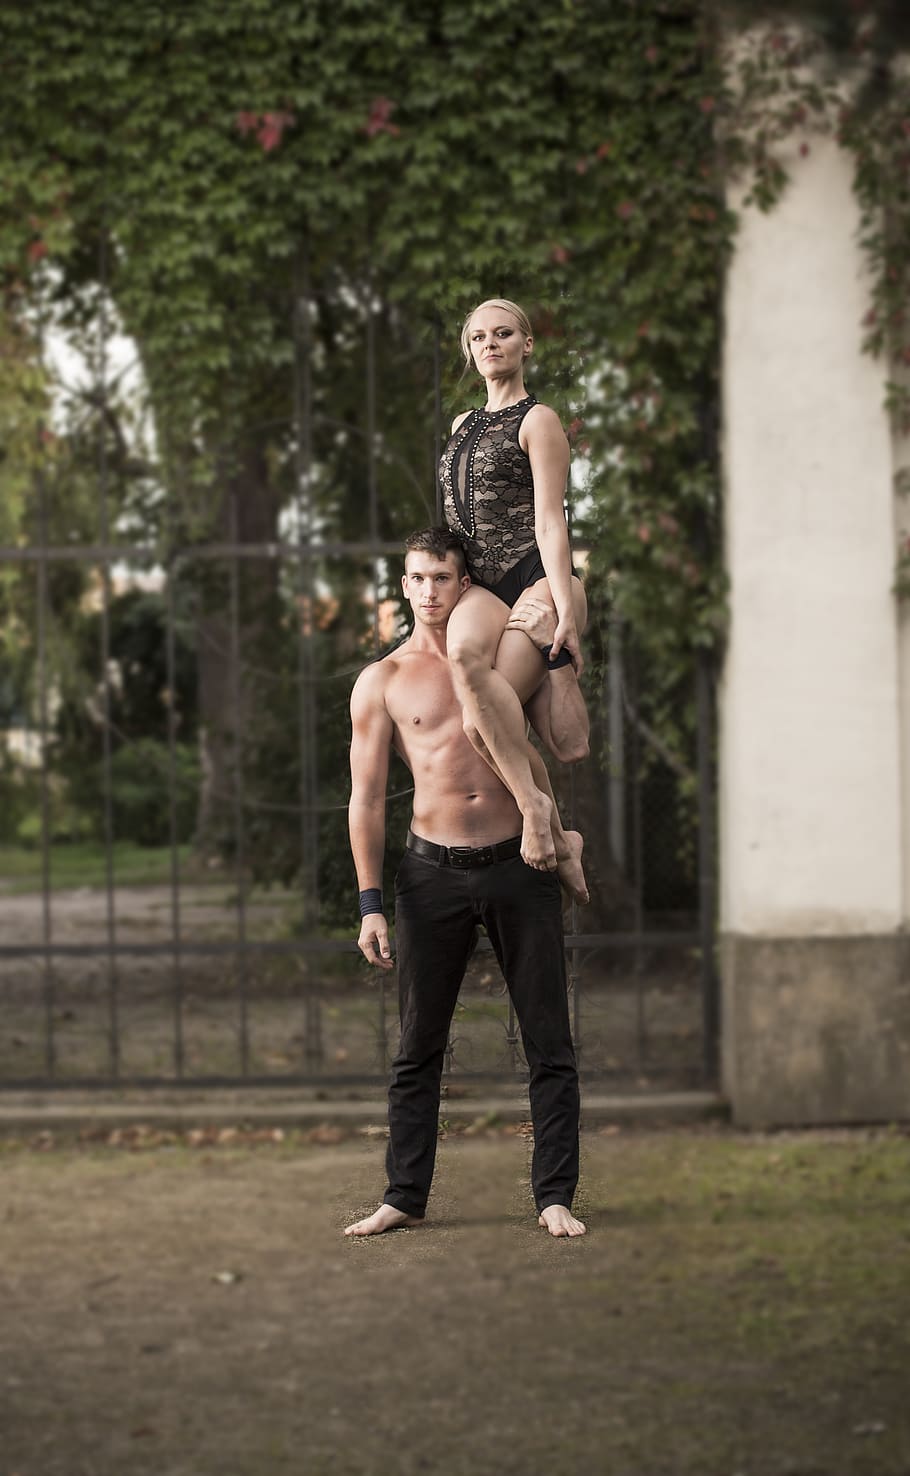 acrobatic, dance, gymnastics, pose, fitness, dancers, two people, full length, standing, couple - relationship